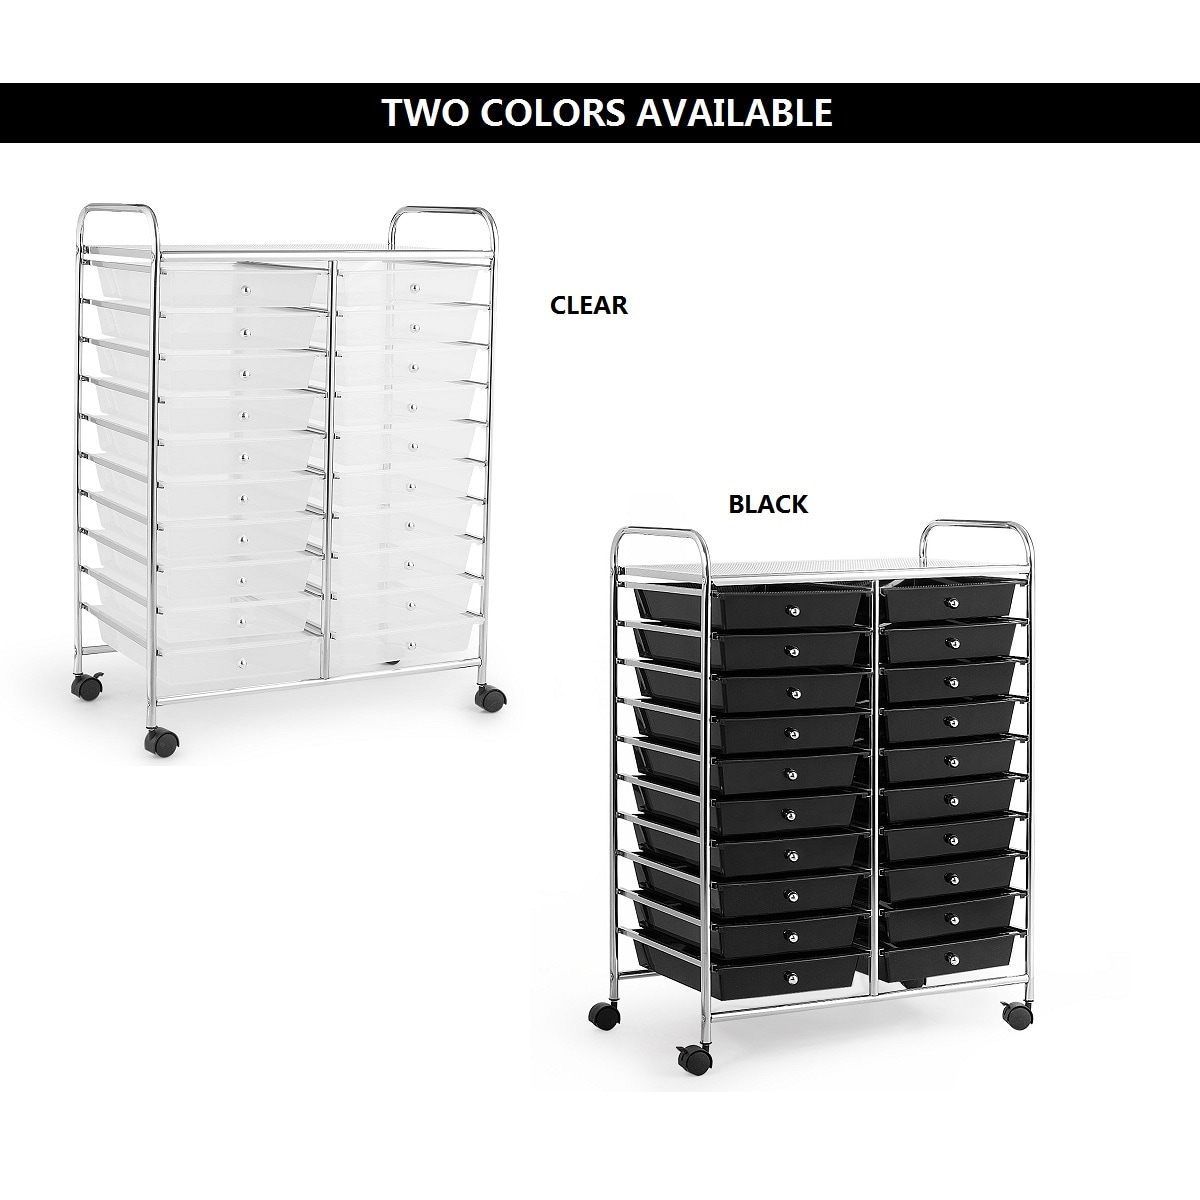 https://ak1.ostkcdn.com/images/products/is/images/direct/cecb3441aebe144921f6b830811c7627e1008d7f/Costway-20-Drawers-Rolling-Cart-Storage-Scrapbook-Paper-Studio-Organizer-Bins-Clear.jpg